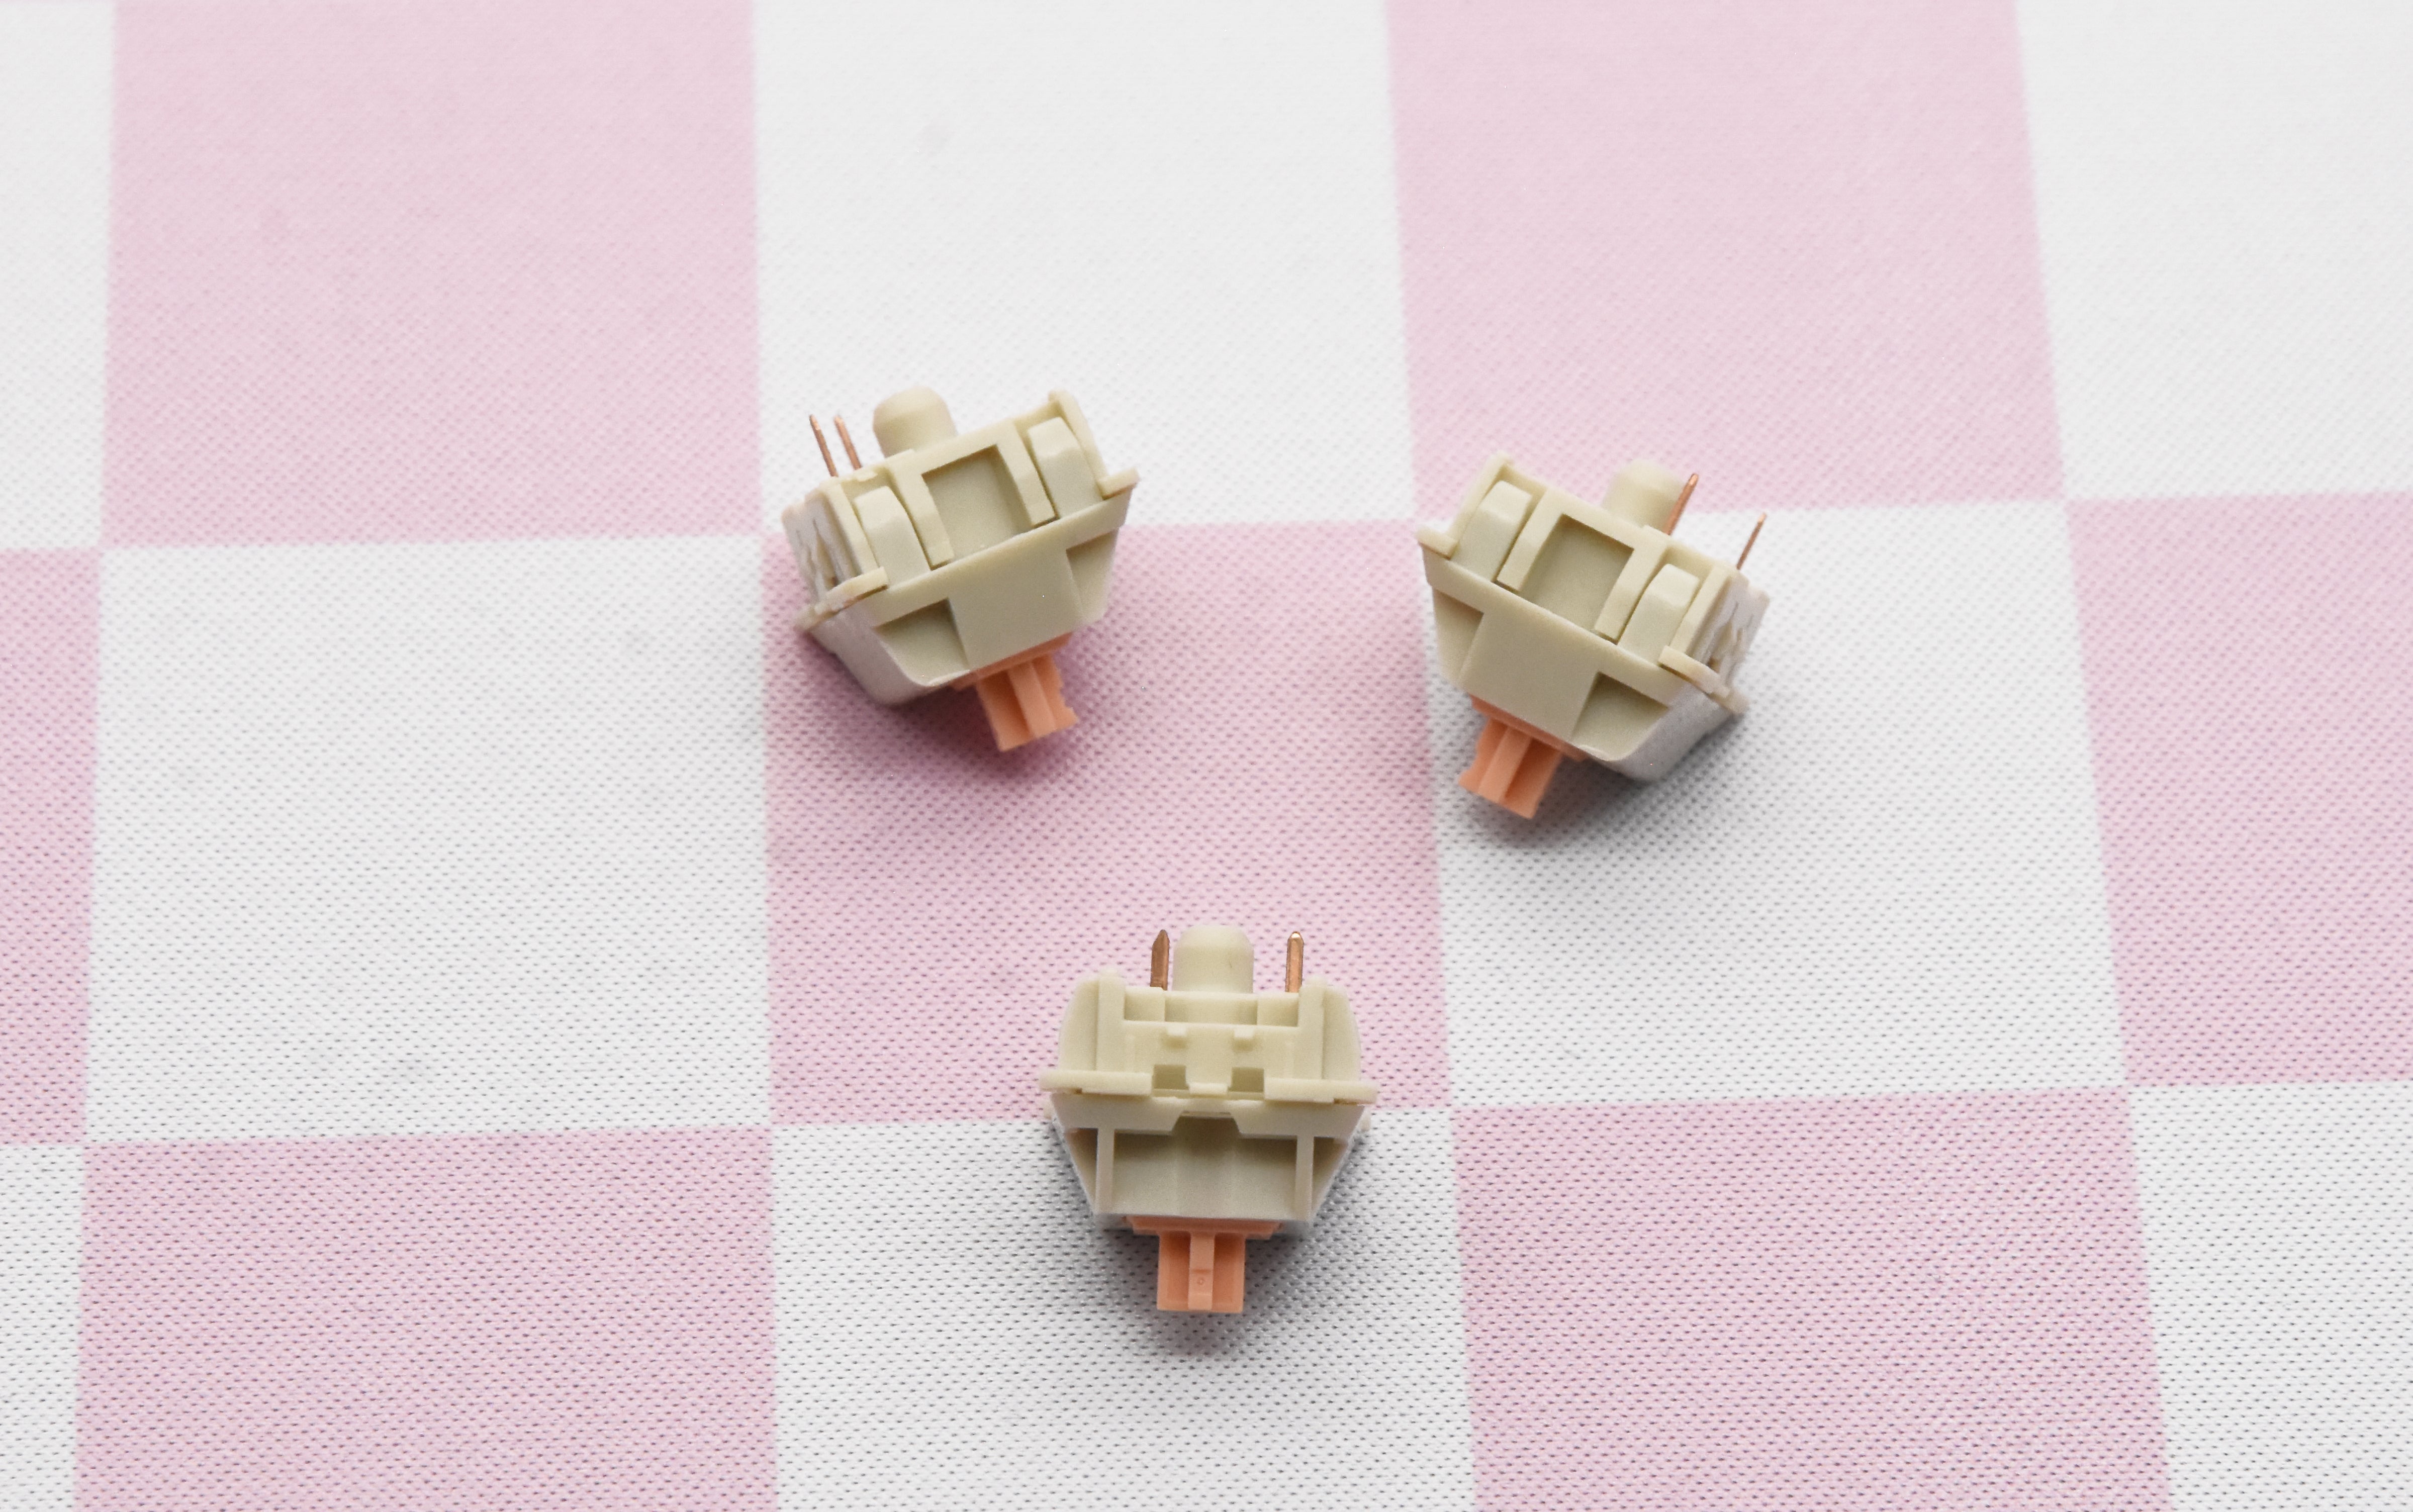 MMD HOLY PANDA V2 TACTILE SWITCH FACTORY LUBED EDITION (10PCS)